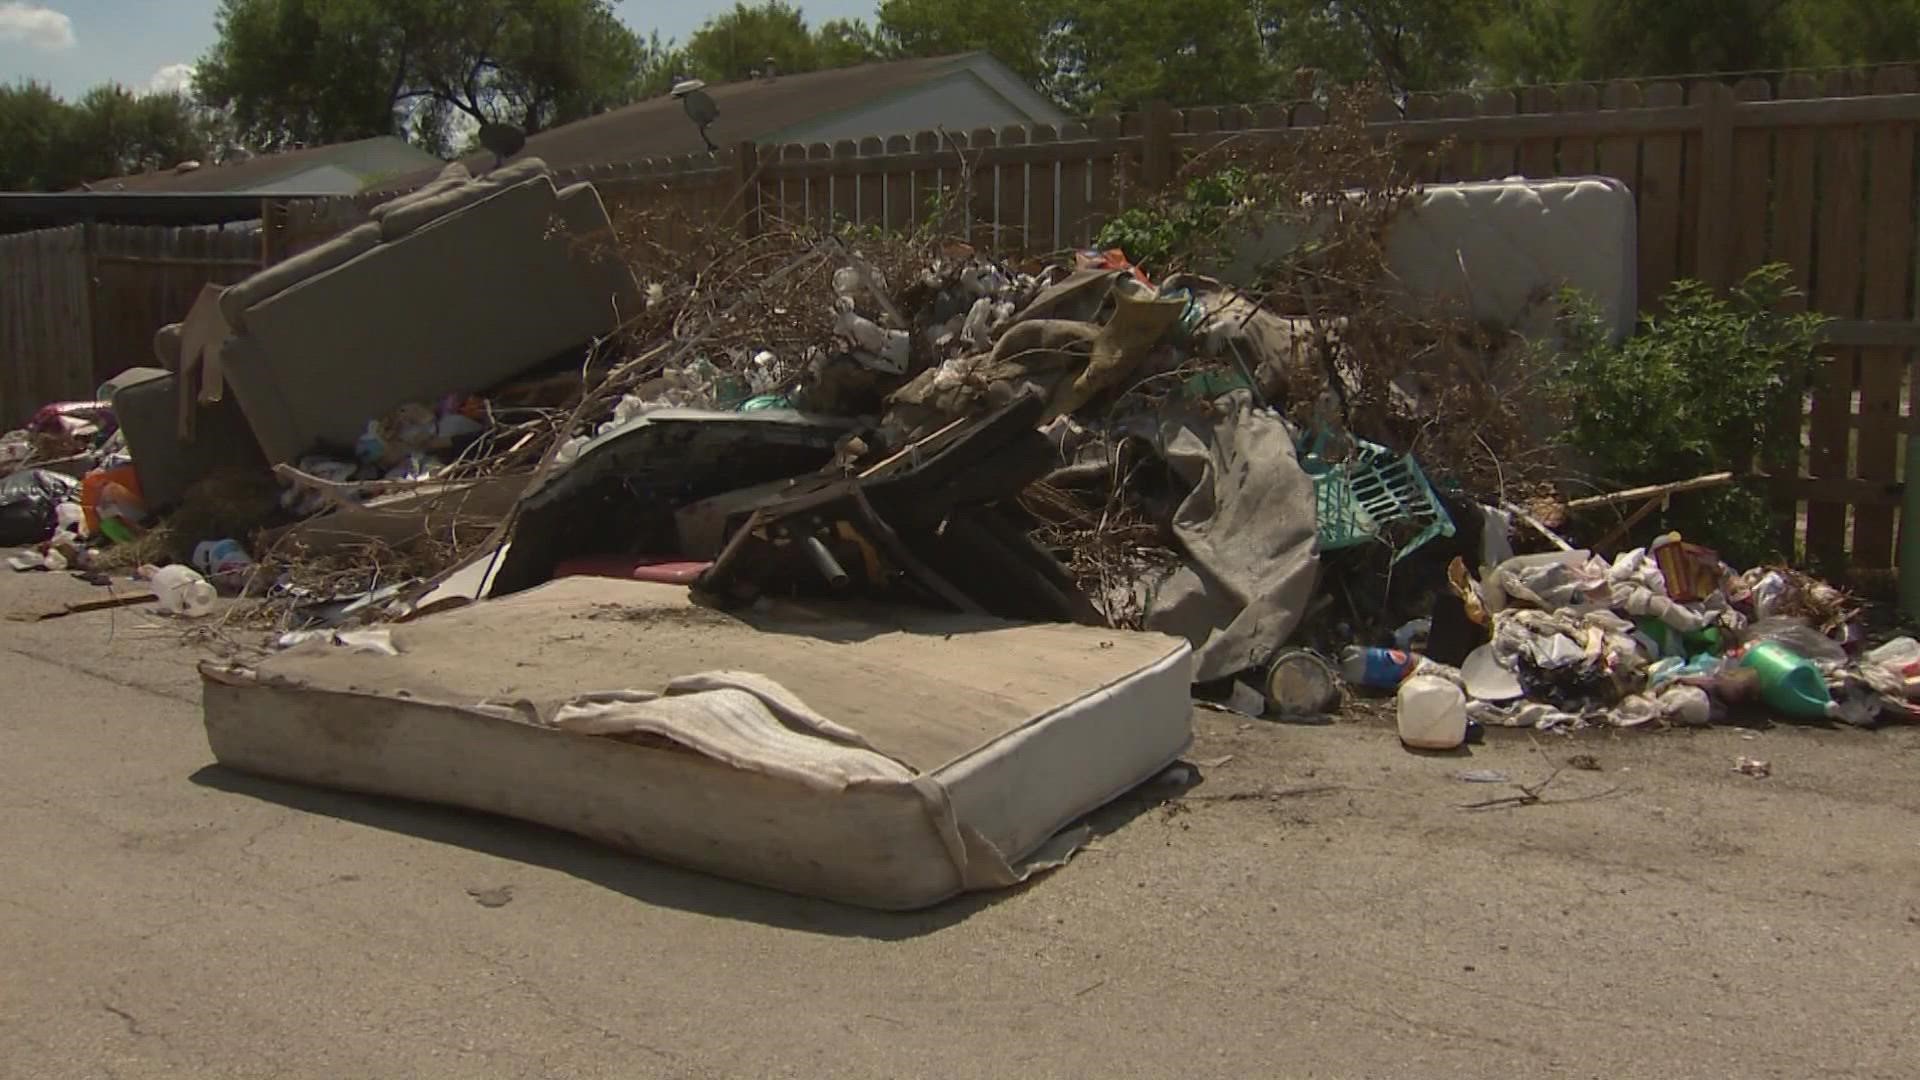 Cleanups can cost taxpayers tens of thousands of dollars, according to the Bexar County Environmental Services Department's Billie Dorries.